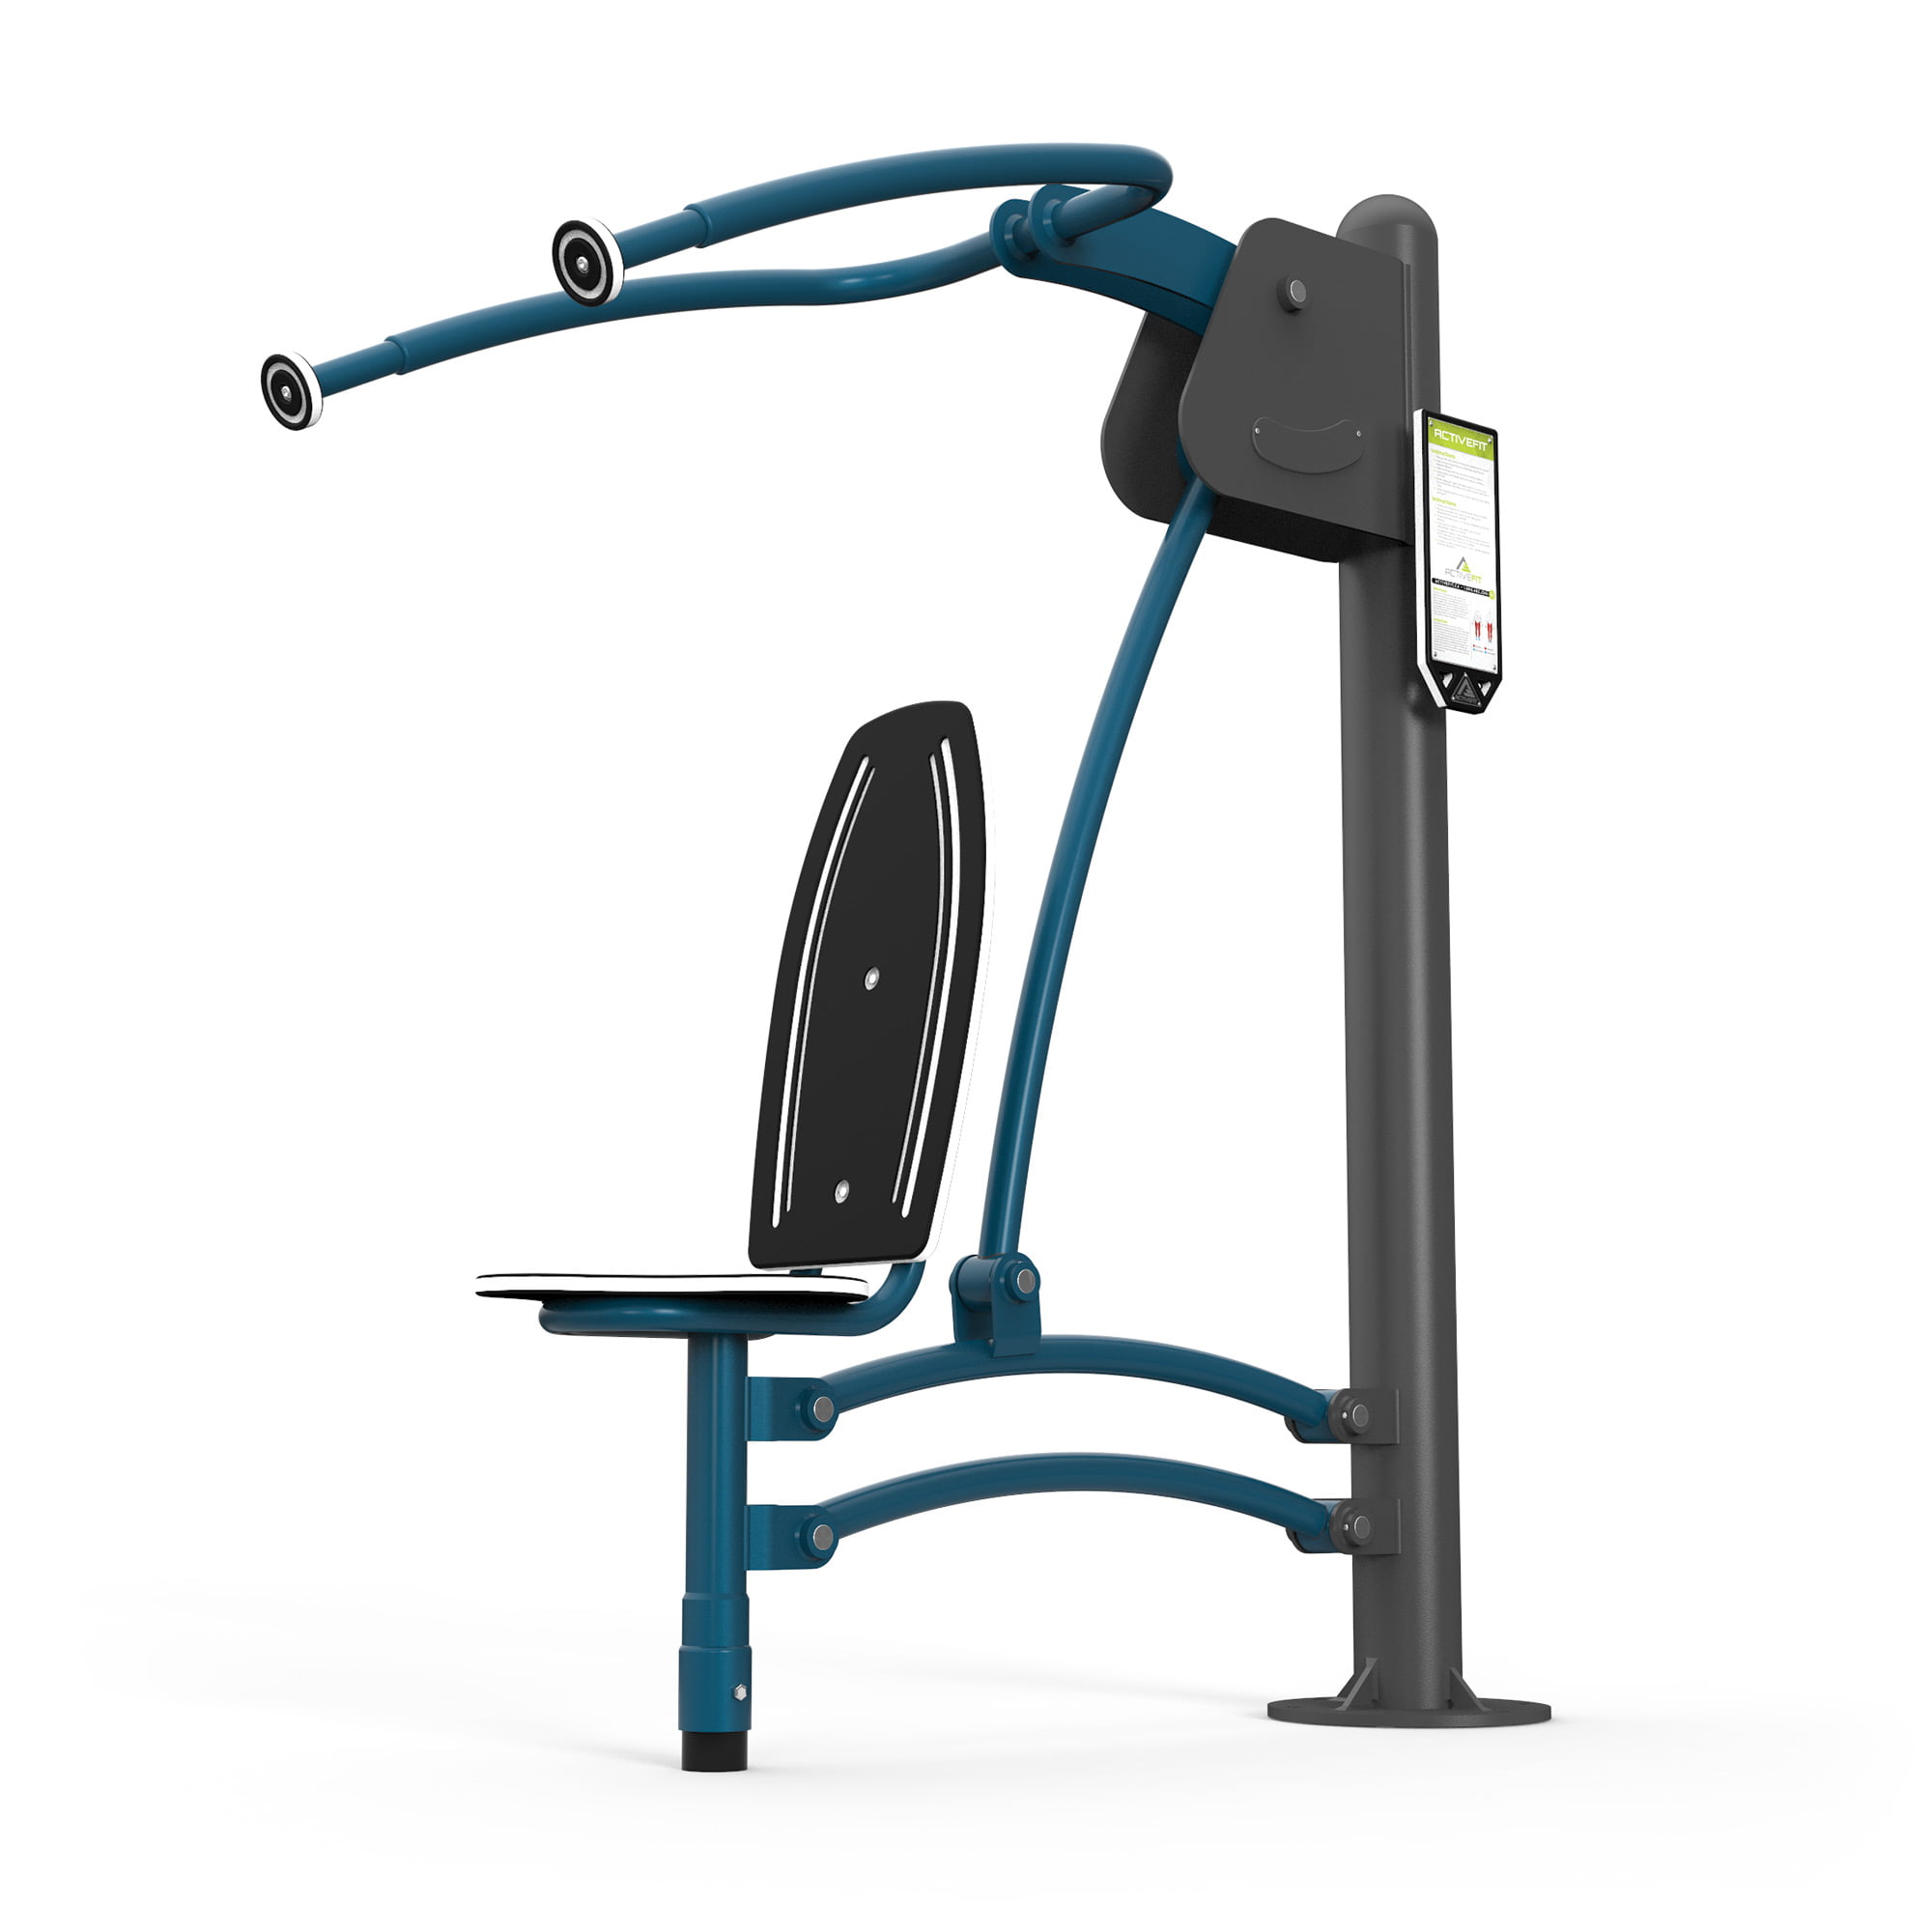 Lat Pulldown - ActiveFit Outdoor Fitness Equipment